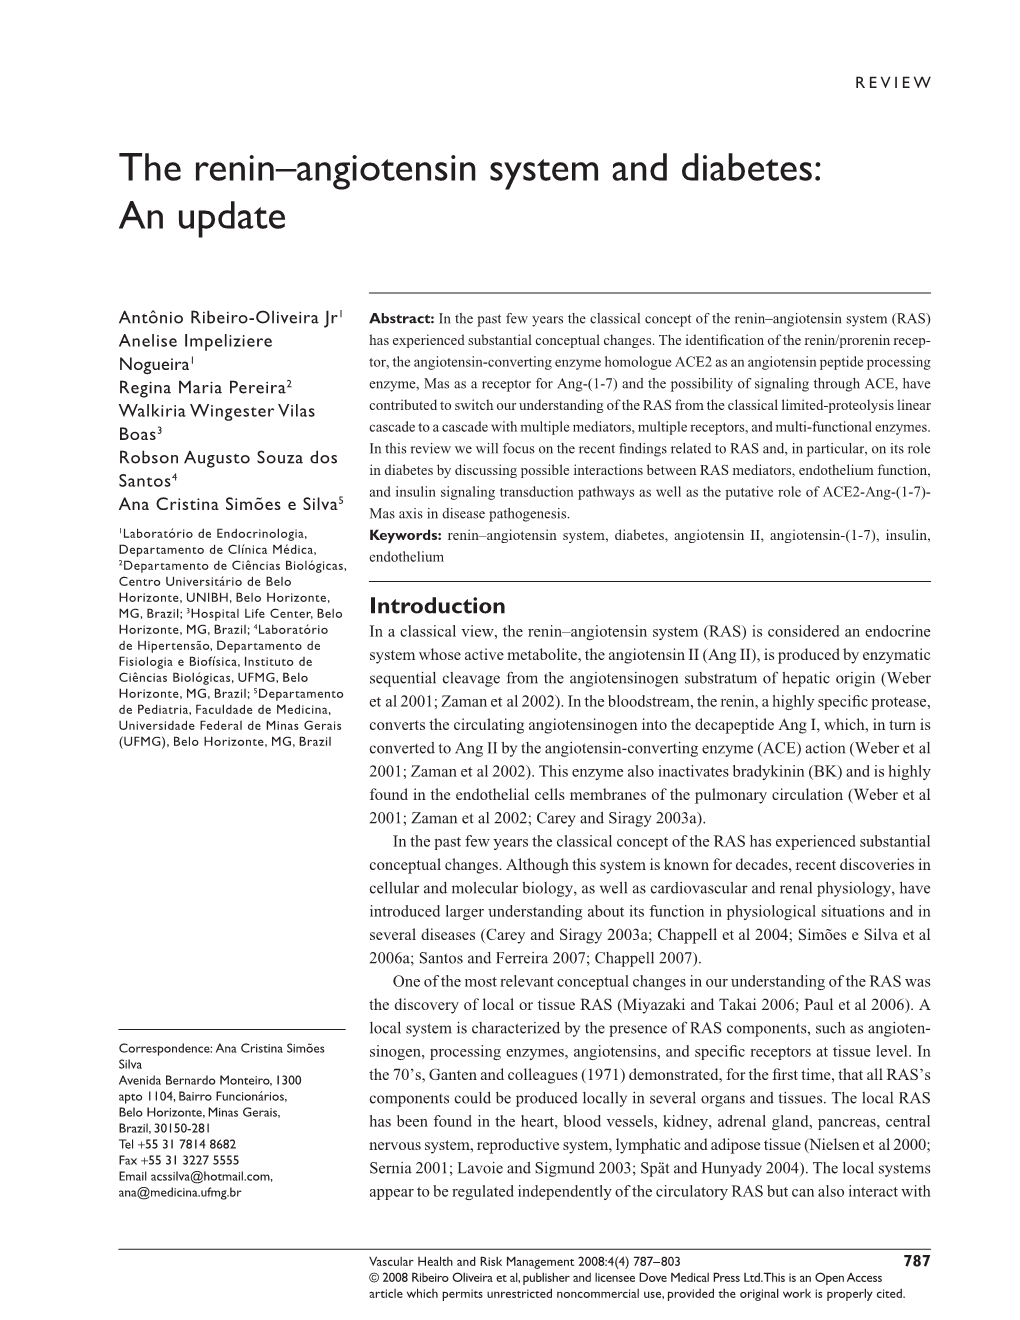 The Renin–Angiotensin System and Diabetes: an Update